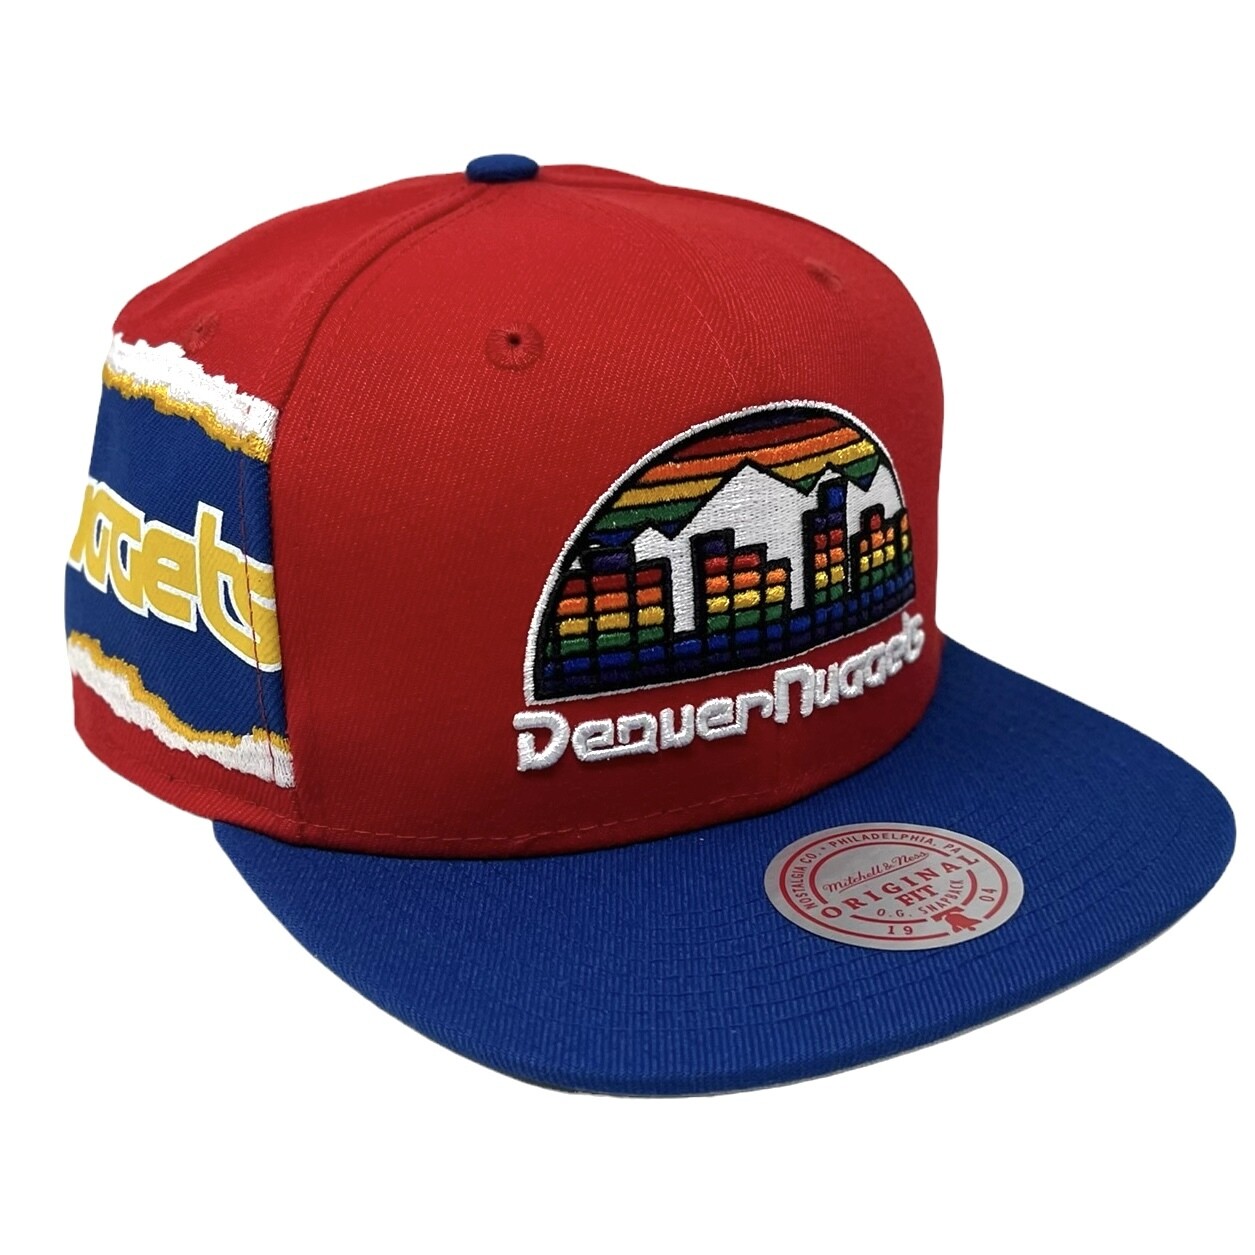 Mitchell & Ness Denver Nuggets SnapBack red hat Official Licensed